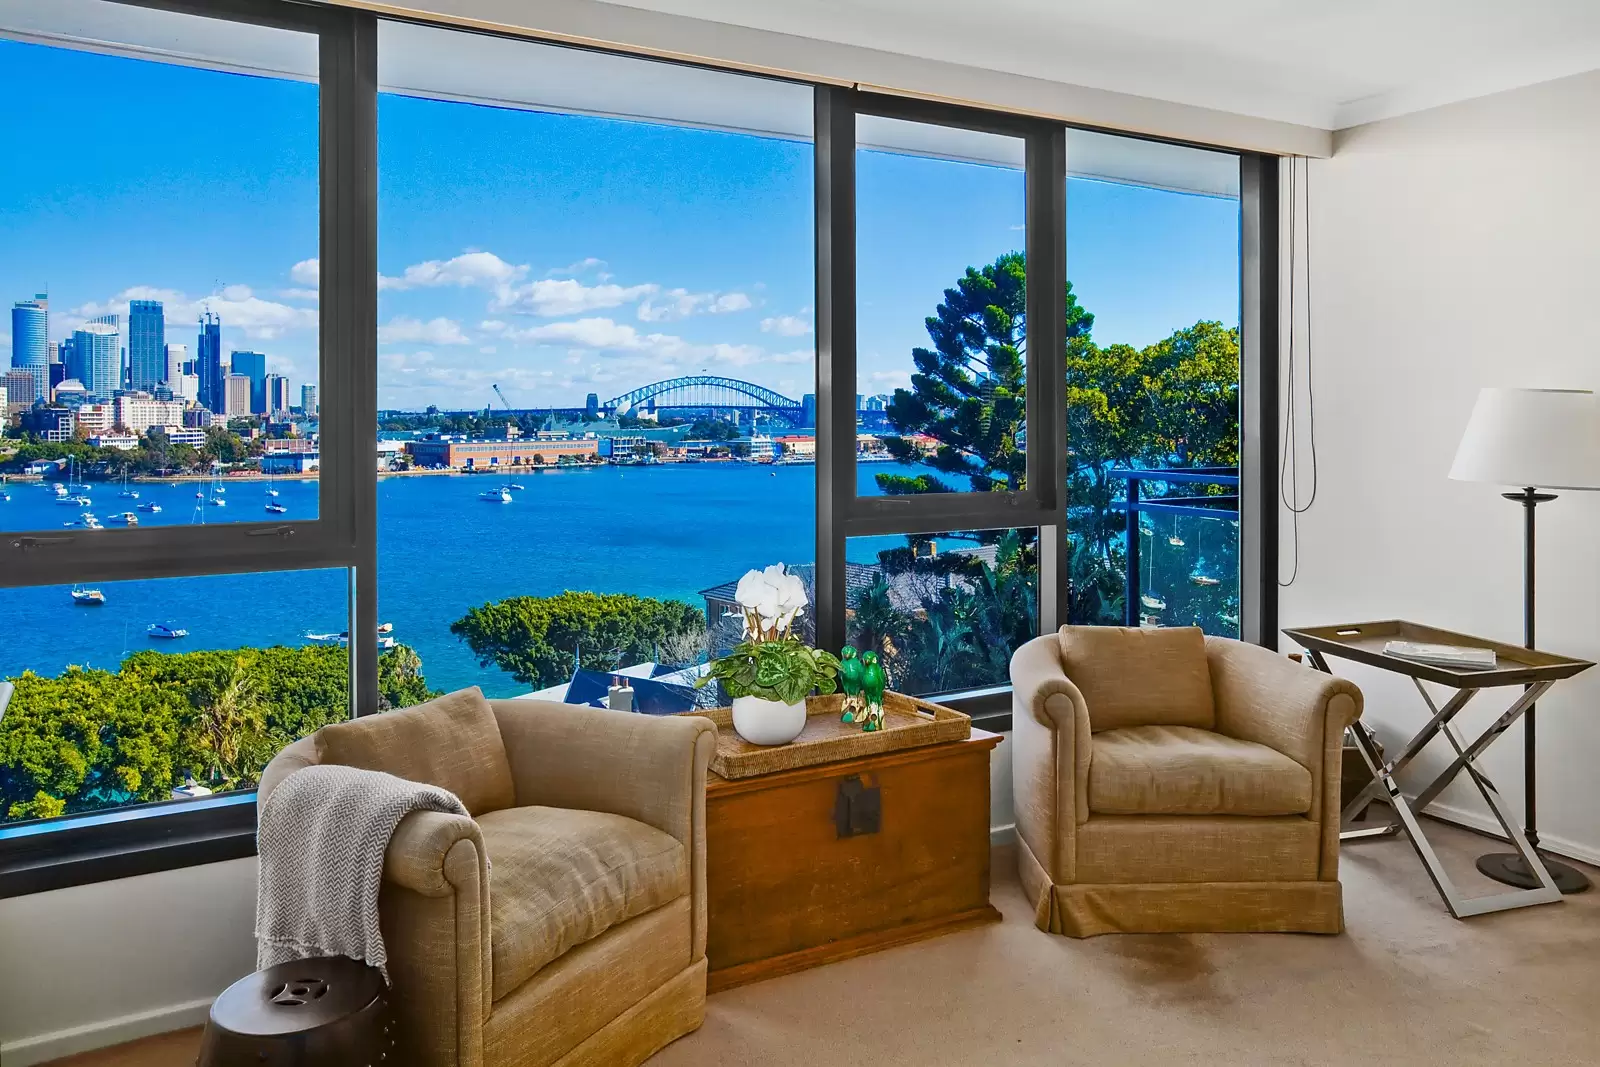 Photo #9: 5A/23 Thornton Street, Darling Point - Sold by Sydney Sotheby's International Realty